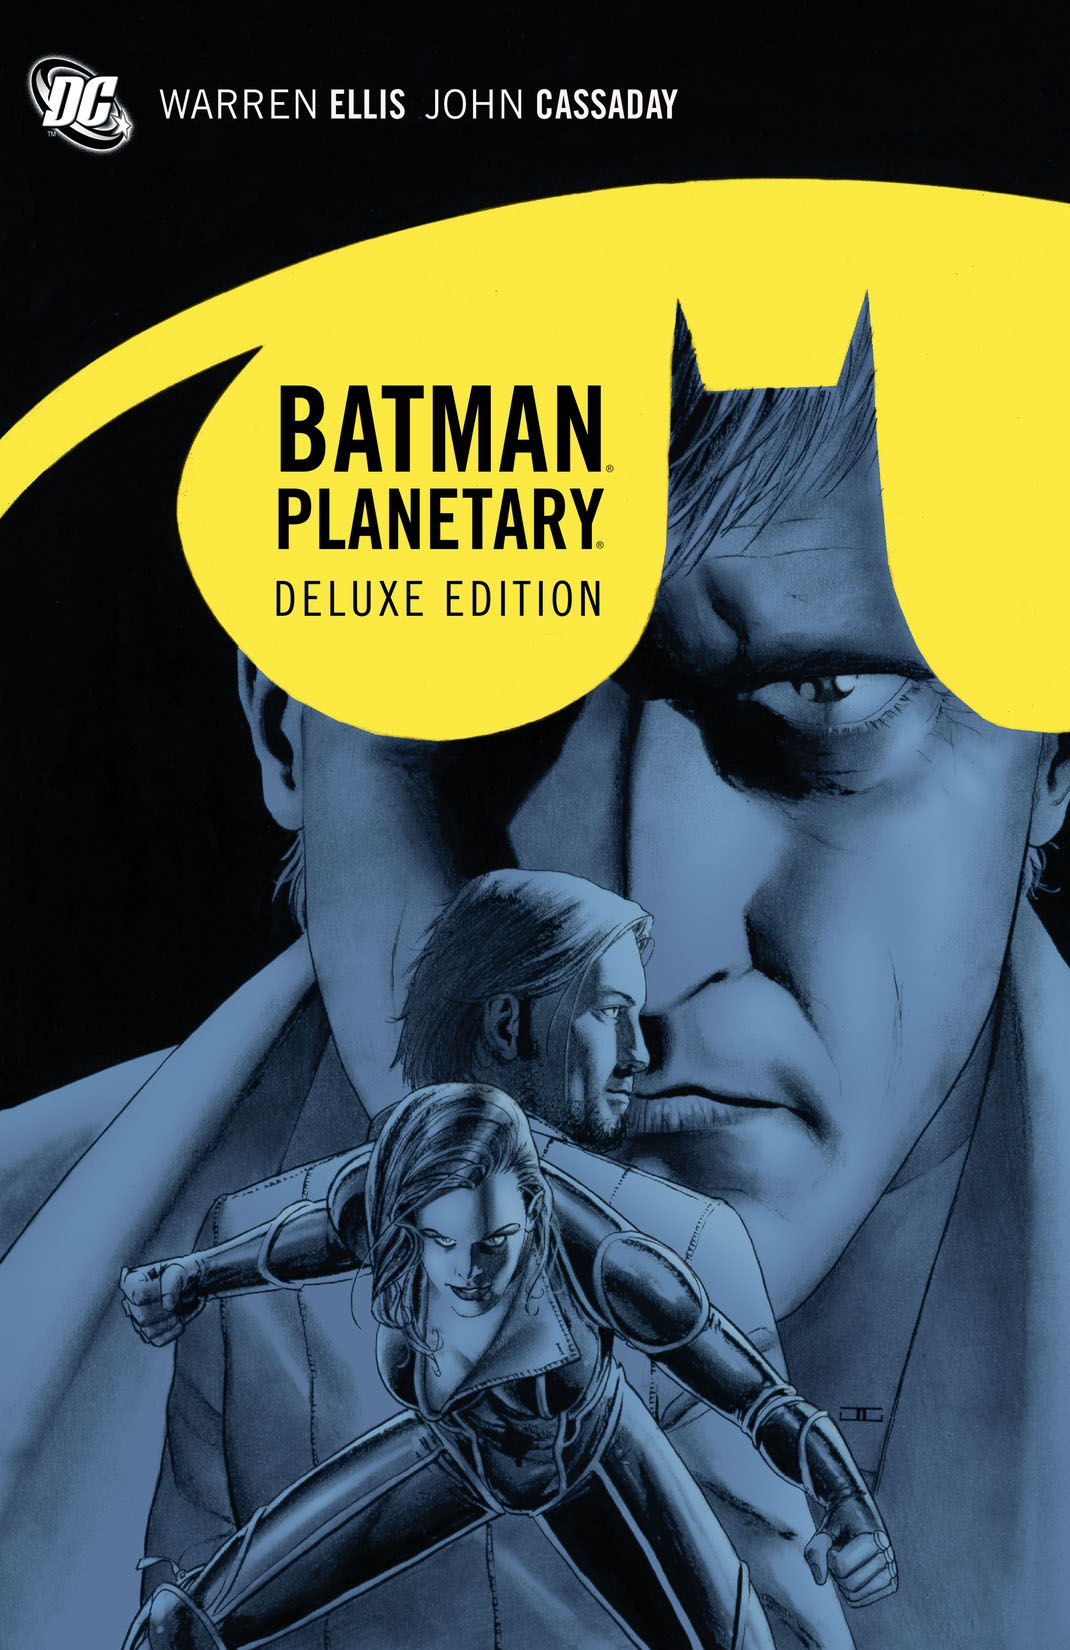 Deluxe Planetary/Batman preview images